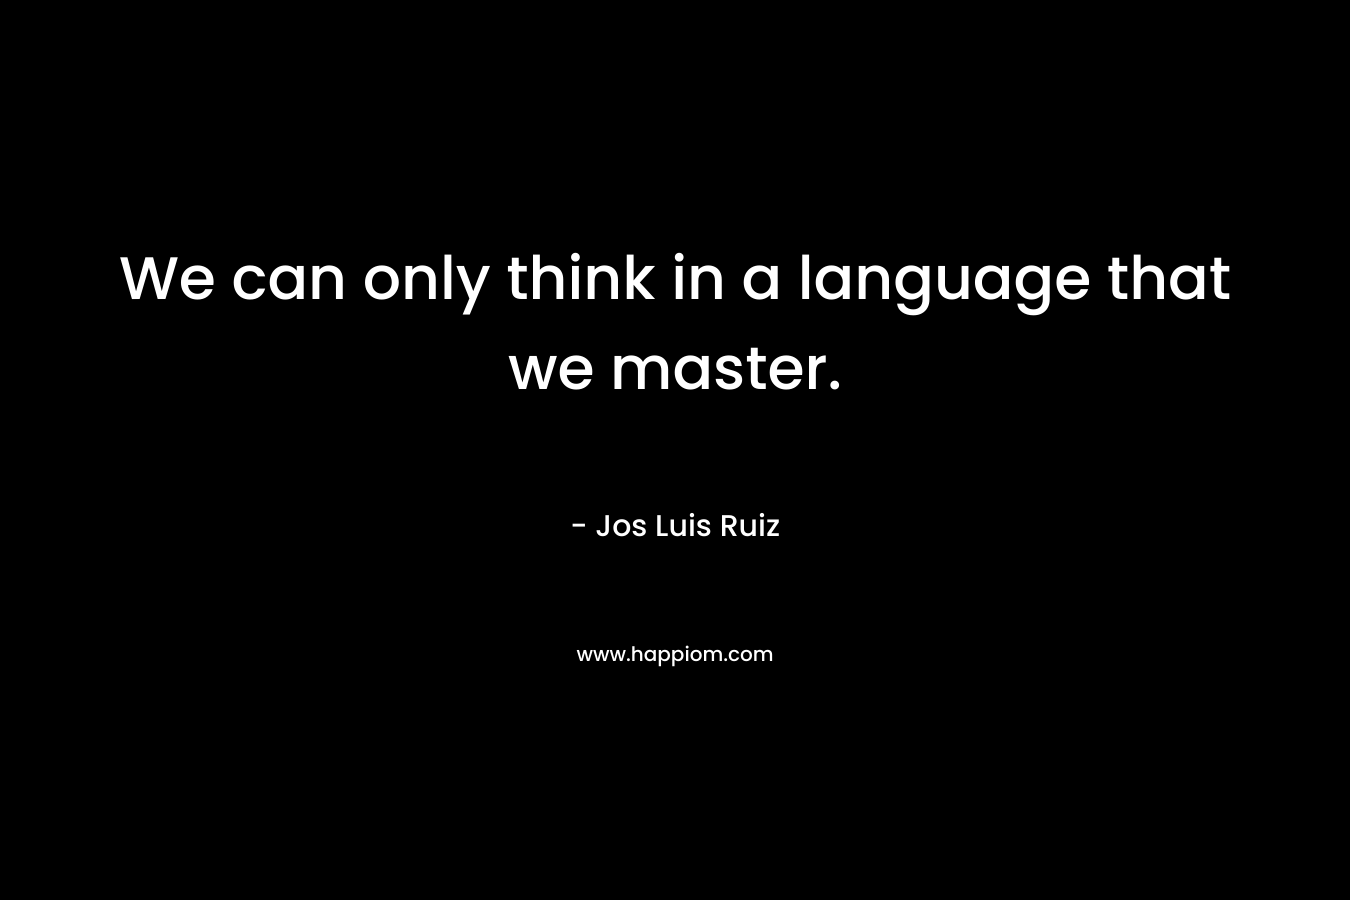 We can only think in a language that we master. – Jos Luis Ruiz